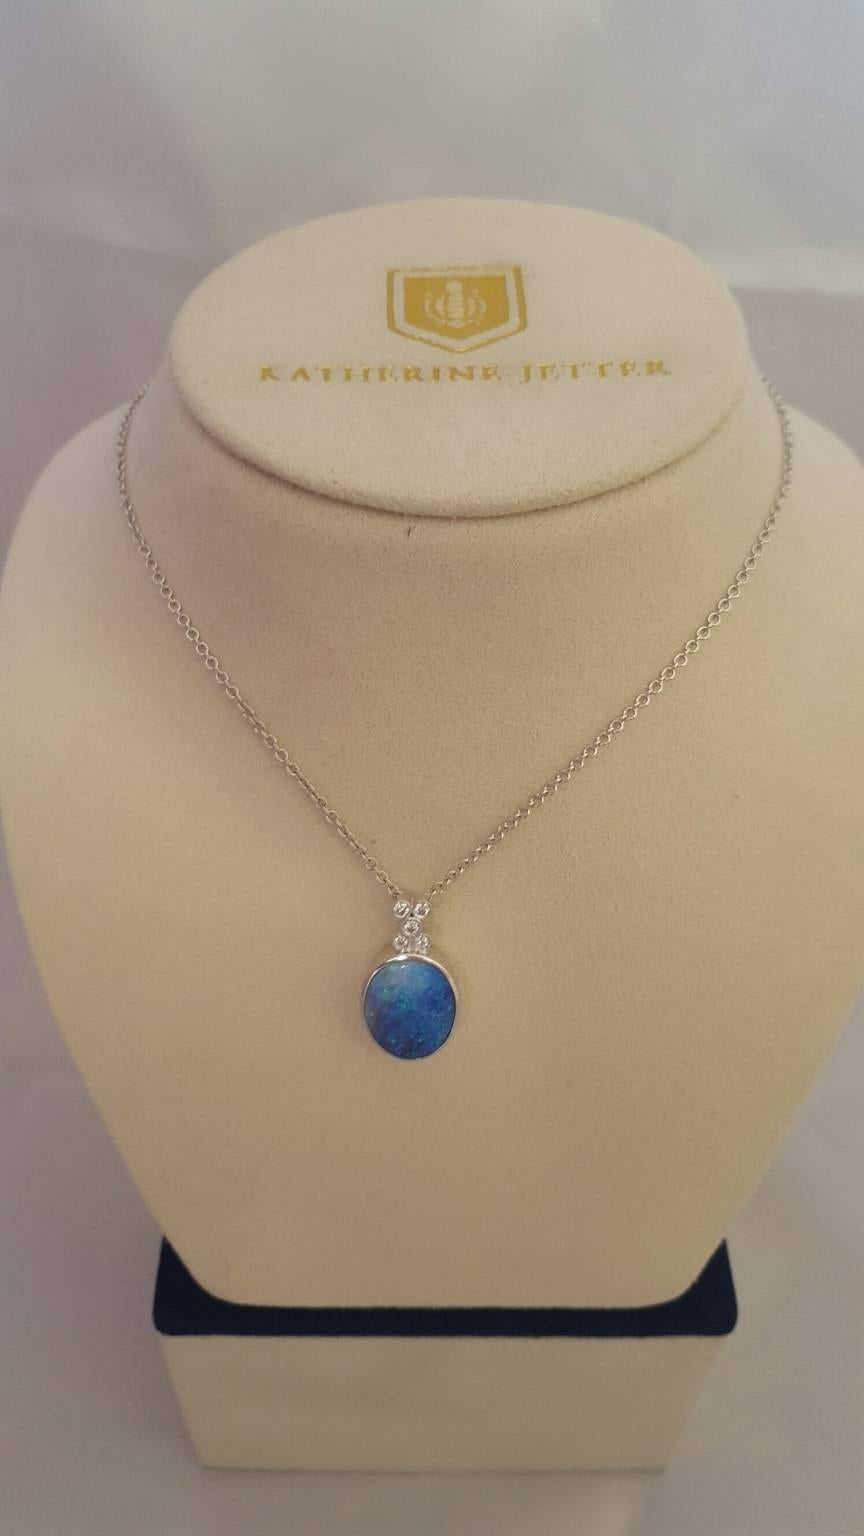 This ageless and timeless pendant is set in 18K White Gold with a 9.33ct Boulder Opal, 0.17ct White Diamond bezel set accents on bail with signature turtle clasp chain. The perfect transition piece from day to night - pairs beautifully with our